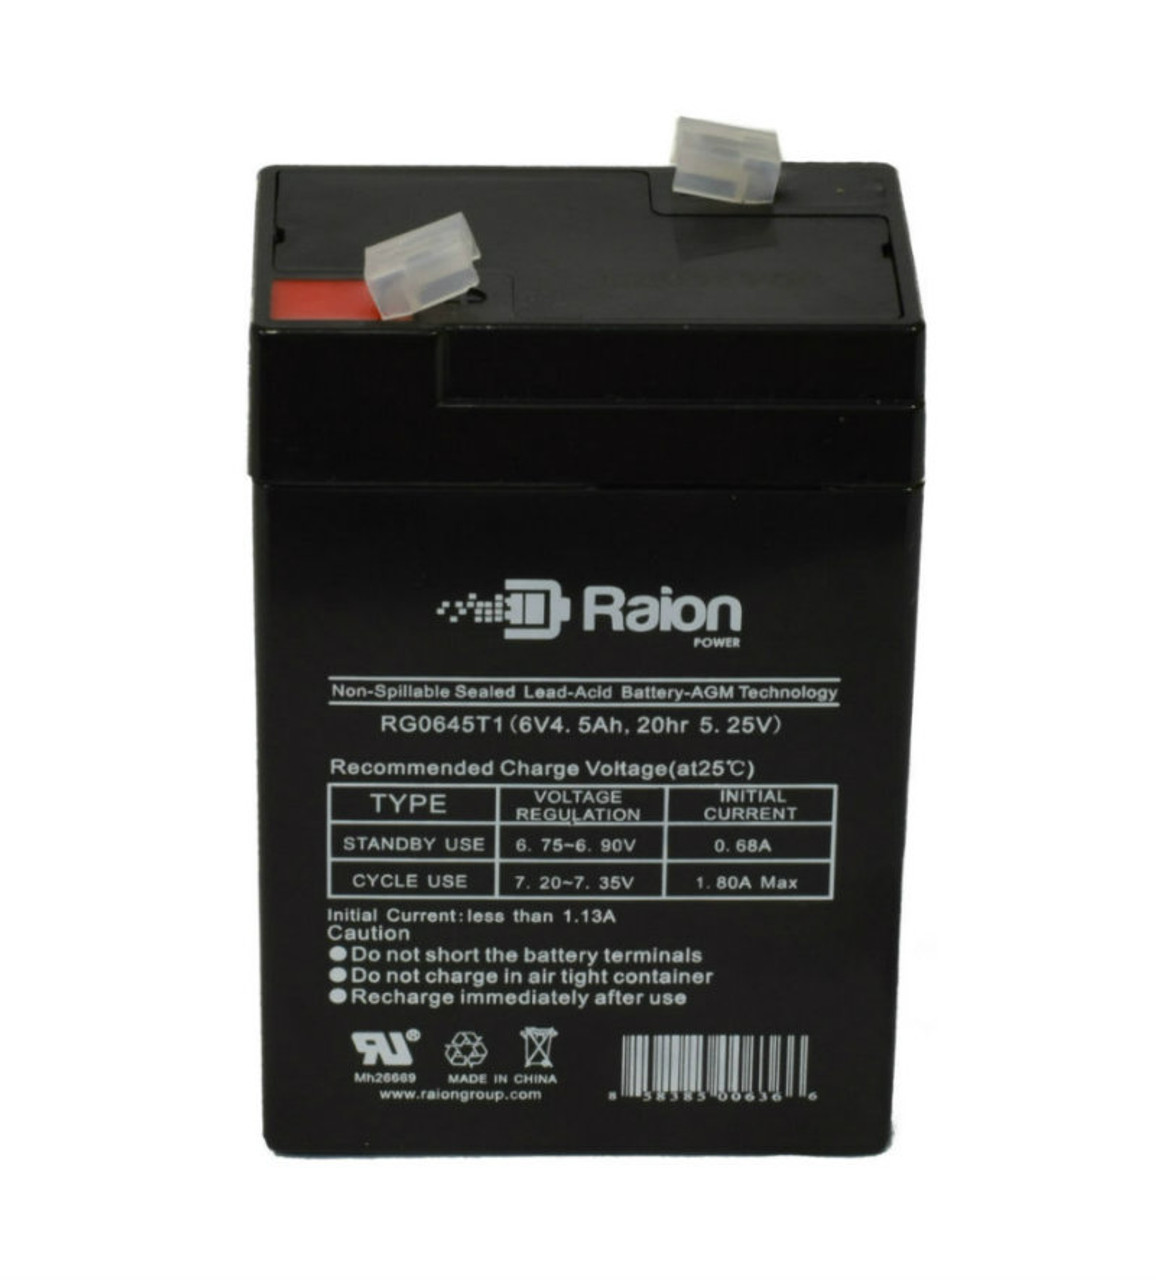 Raion Power RG0645T1 Replacement Battery Cartridge for Criticare Systems 50245 Pulse Oximeter